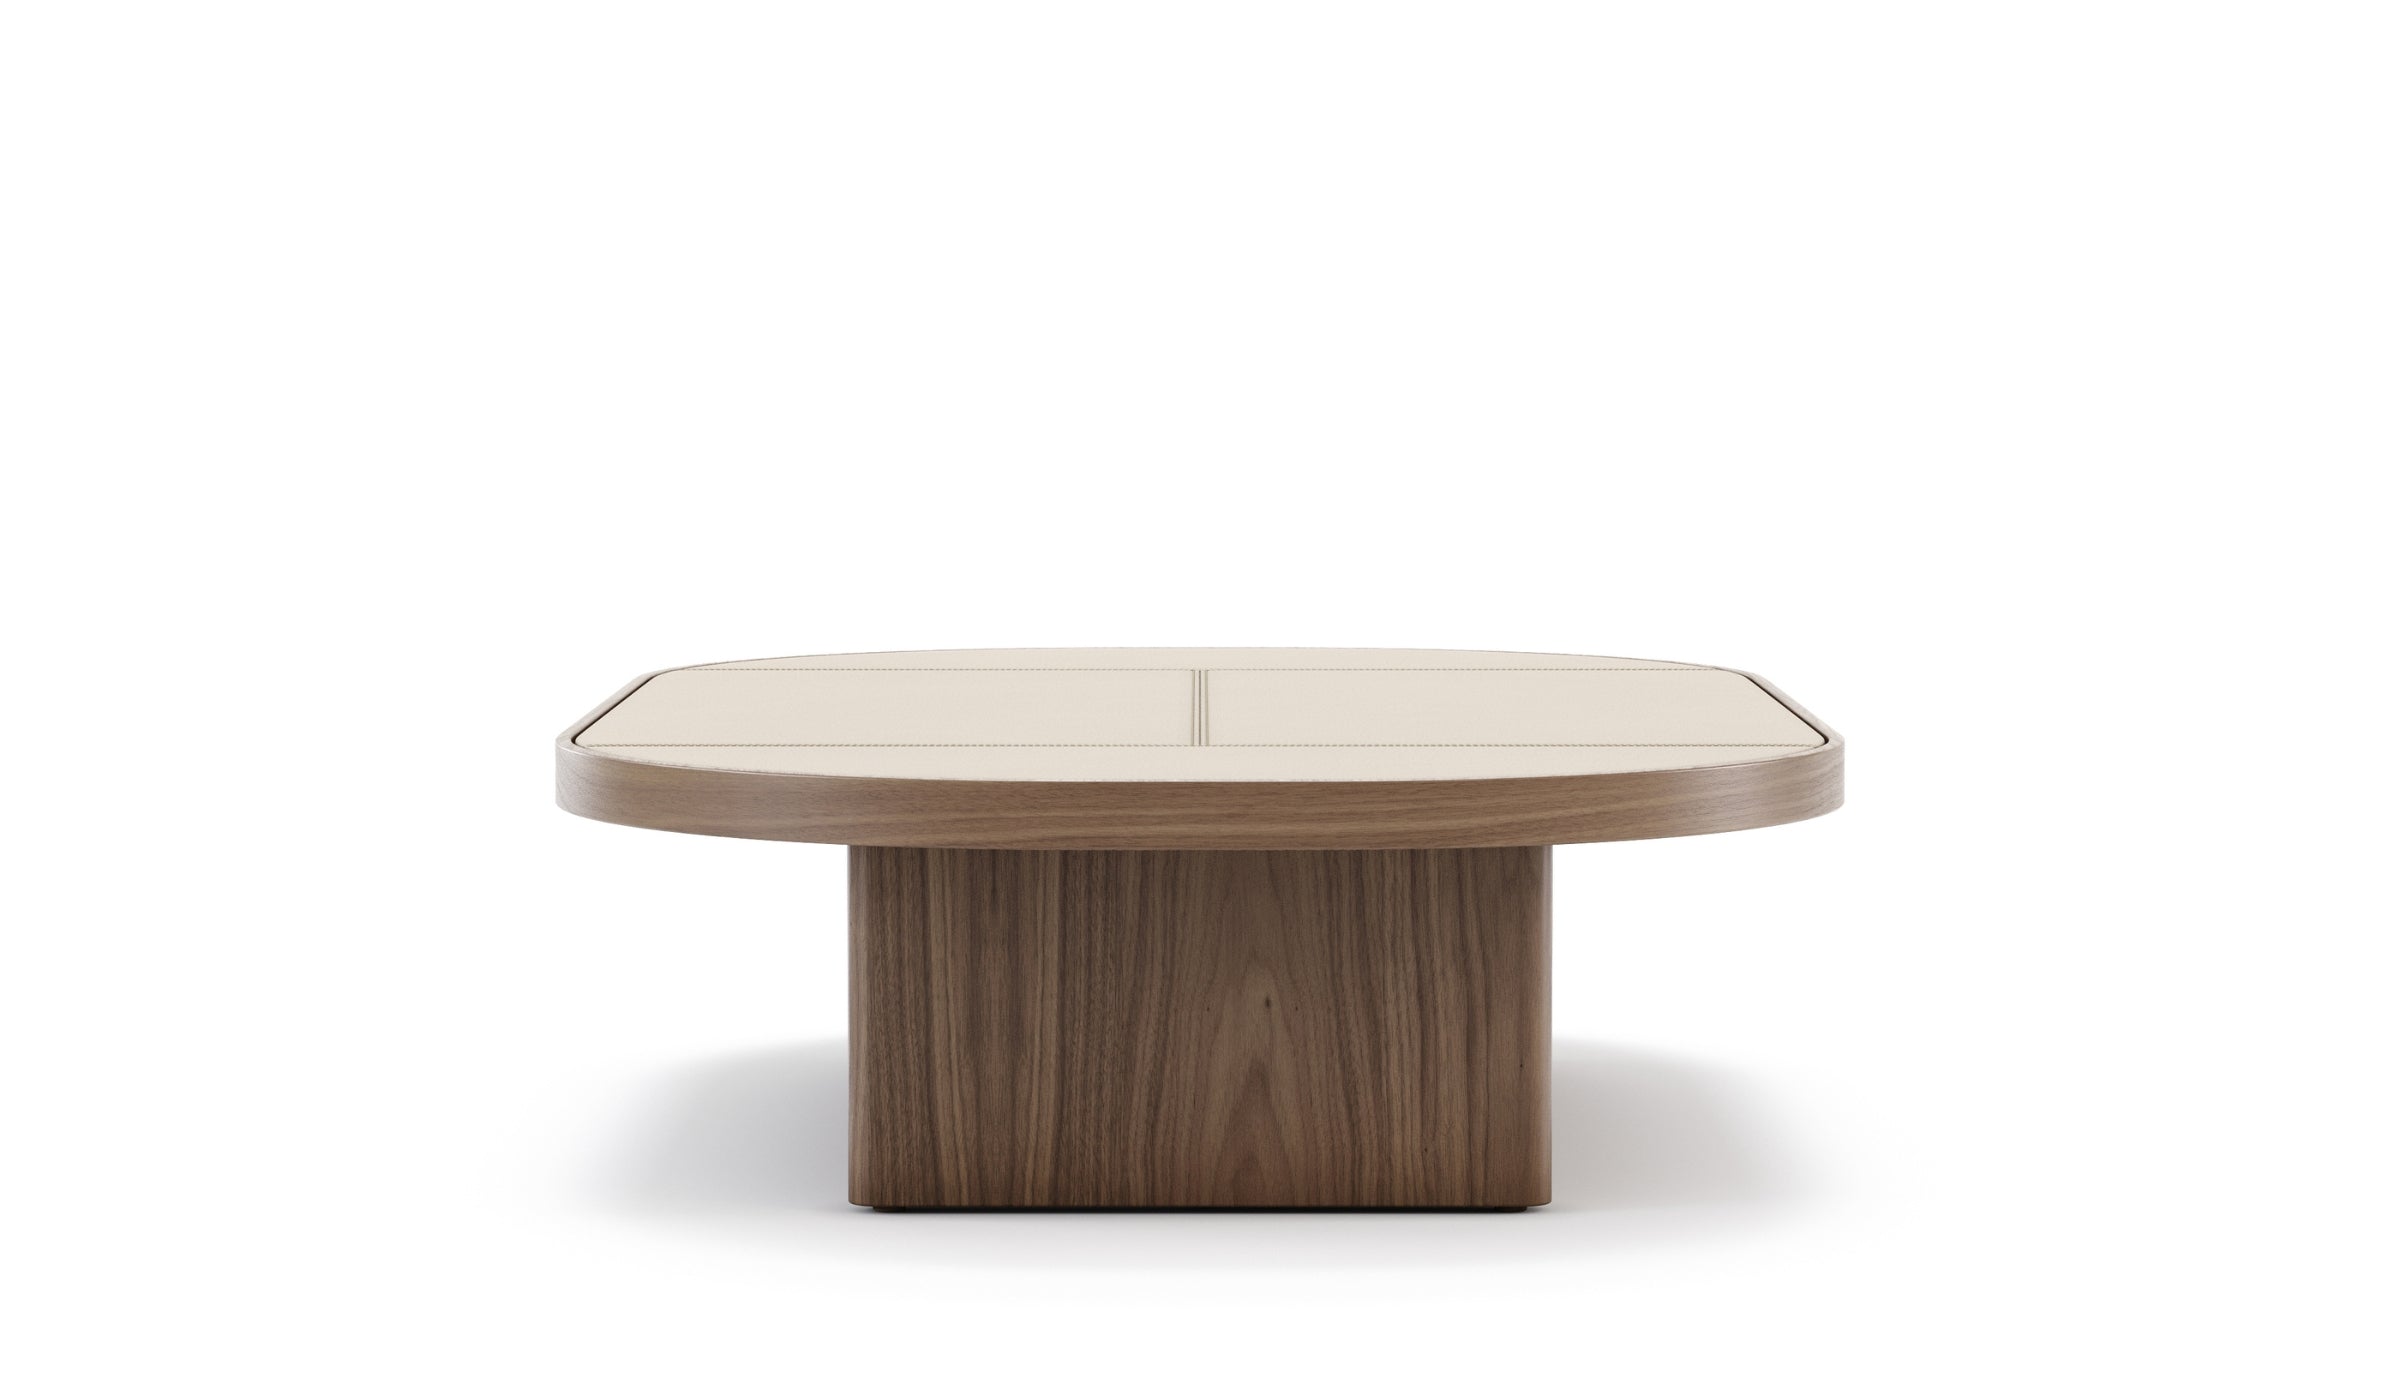 Gilbert - Coffee table in natural walnut, almond leather finish, L